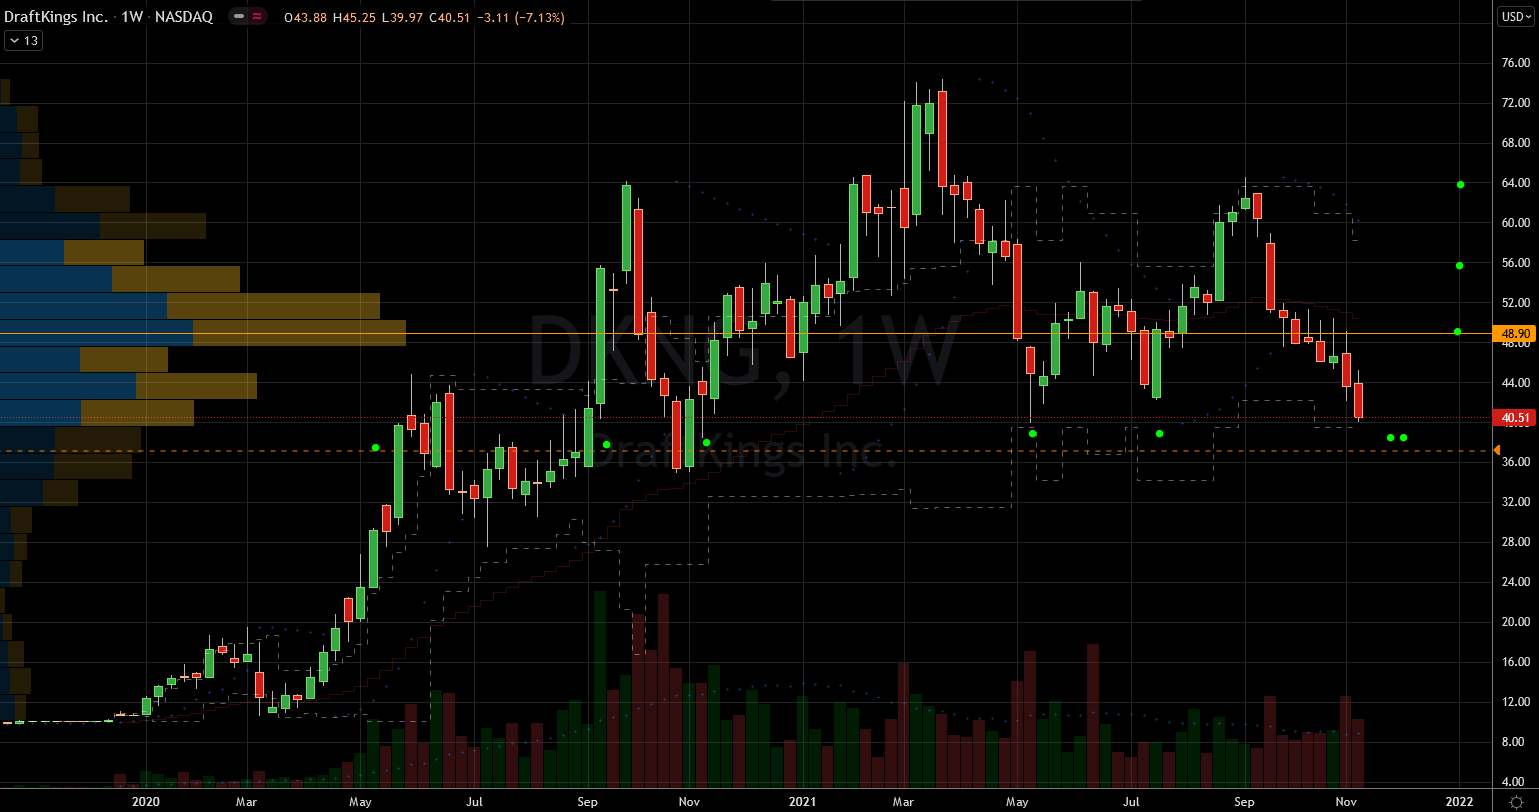 DraftKings (DKNG) Stock Chart Showing Potential Support Zone